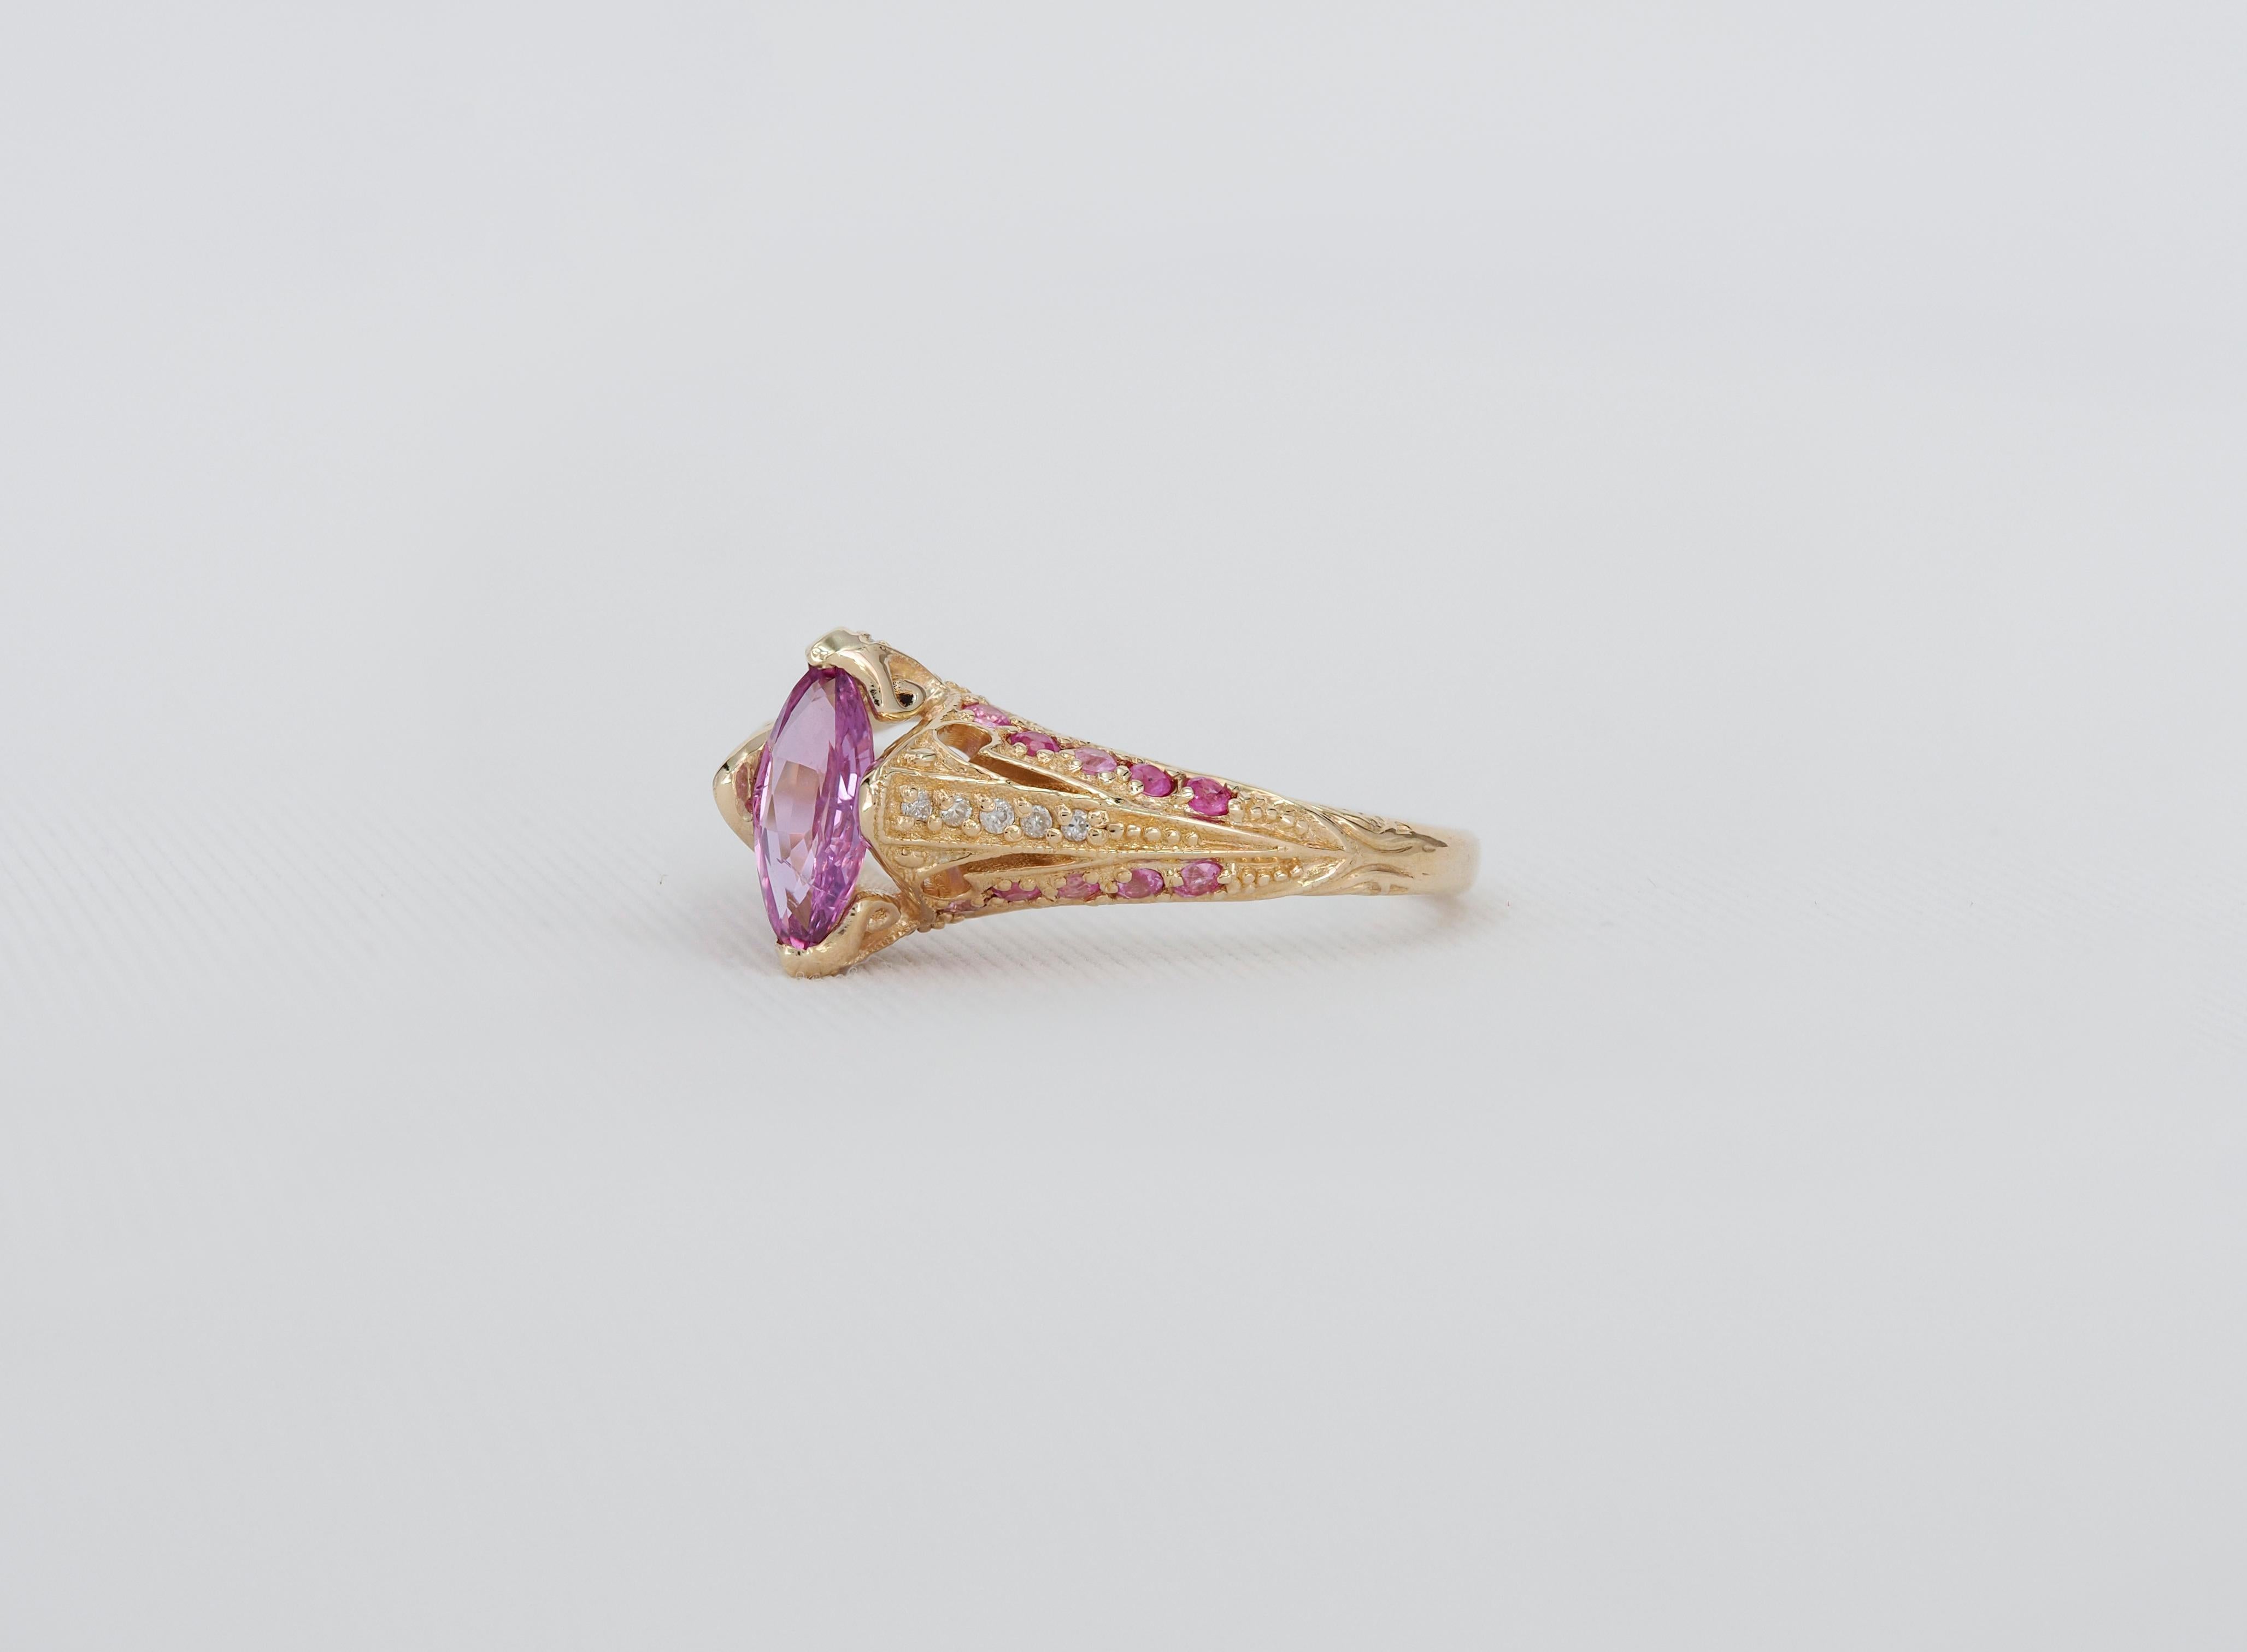 For Sale:  14k gold ring with pink sapphire. Marquise sapphire ring 6